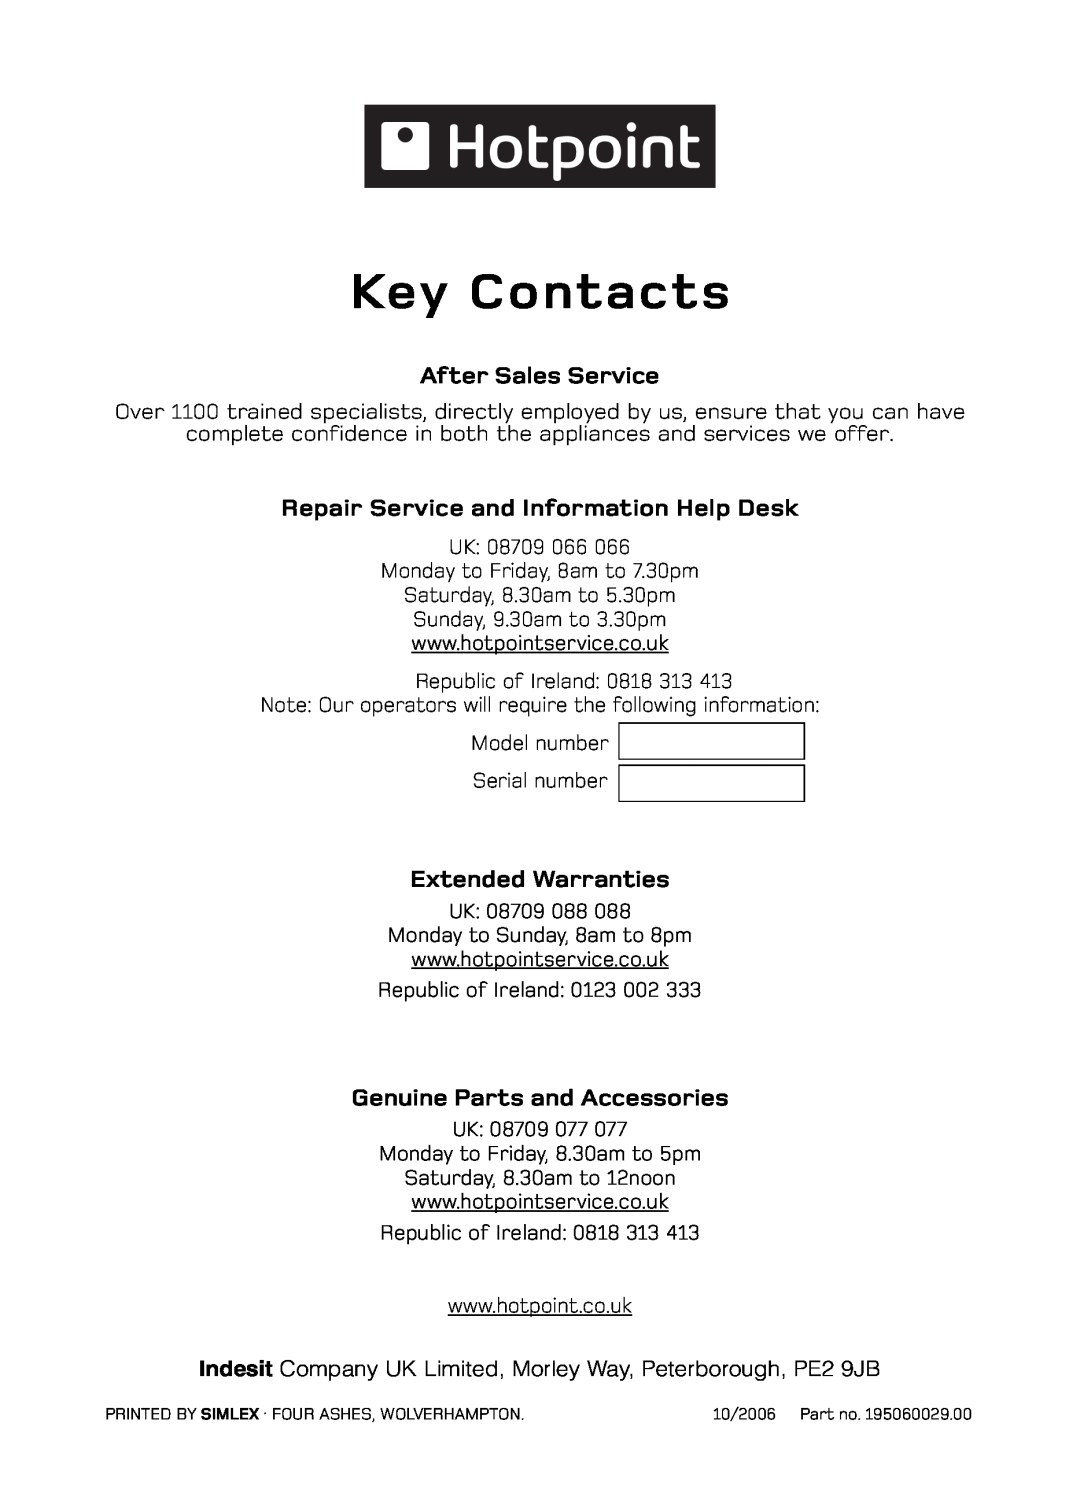 Hotpoint S130E Mk2 manual Key Contacts, After Sales Service, Repair Service and Information Help Desk, Extended Warranties 